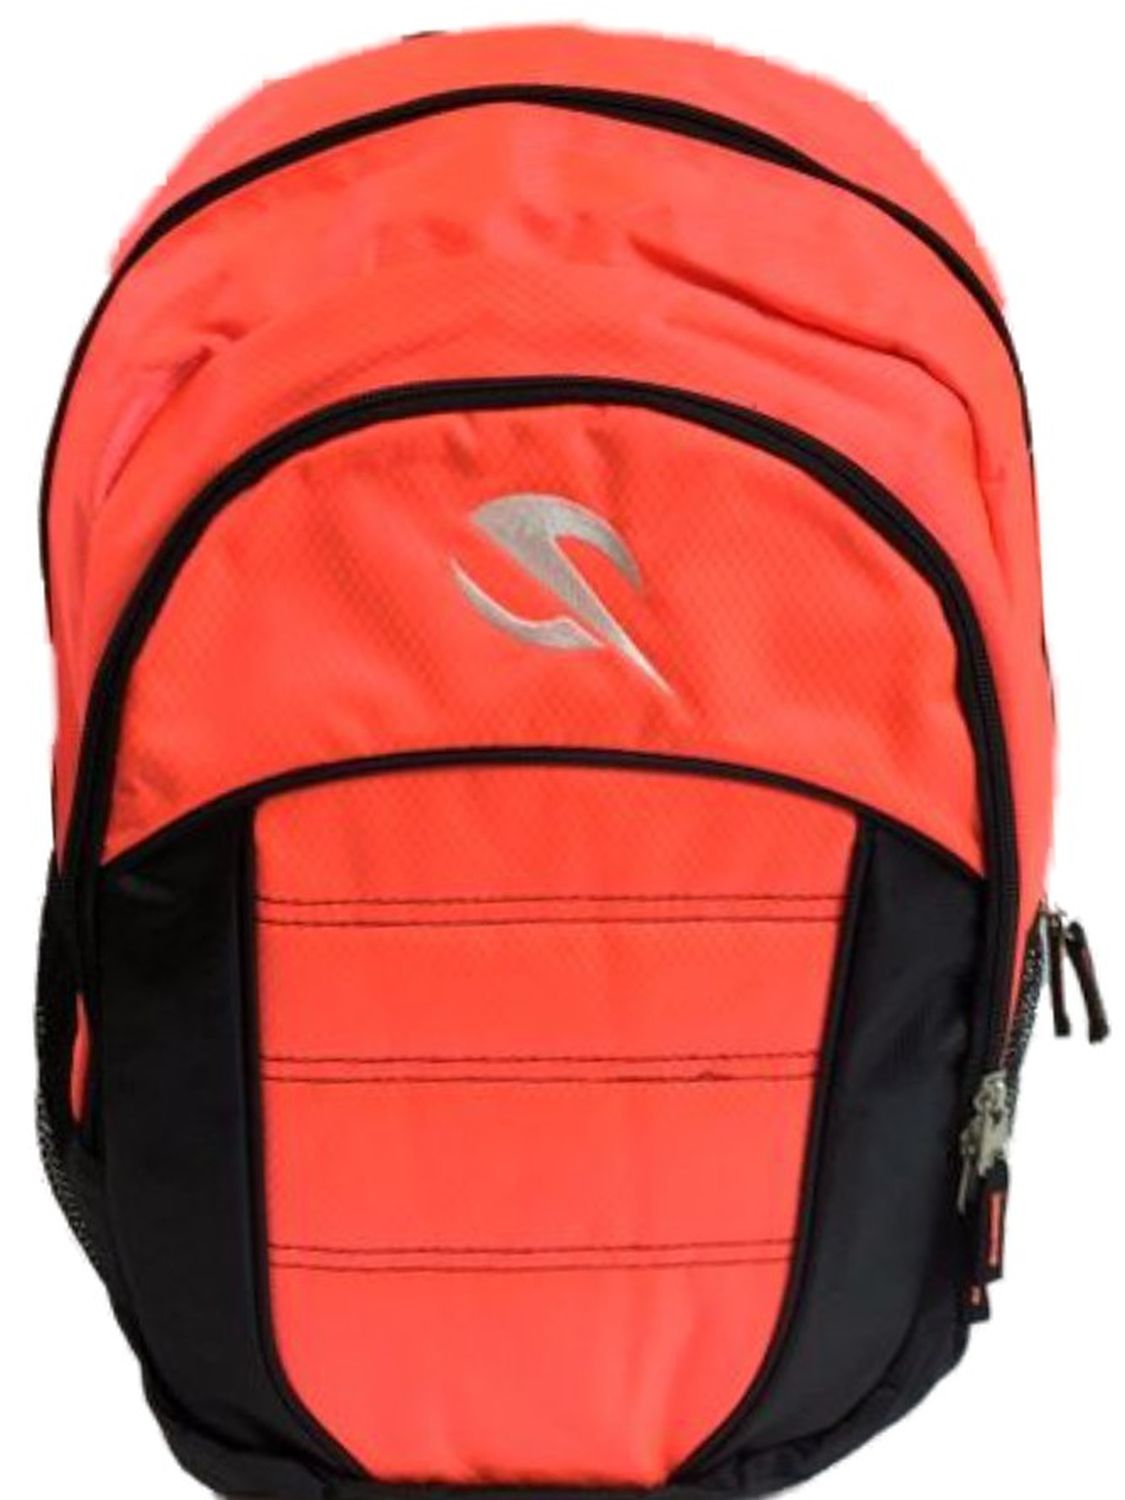 Energy Zone Performance Coral 17" Backpack, School Book Bag With Laptop Sleeve - image 1 of 1